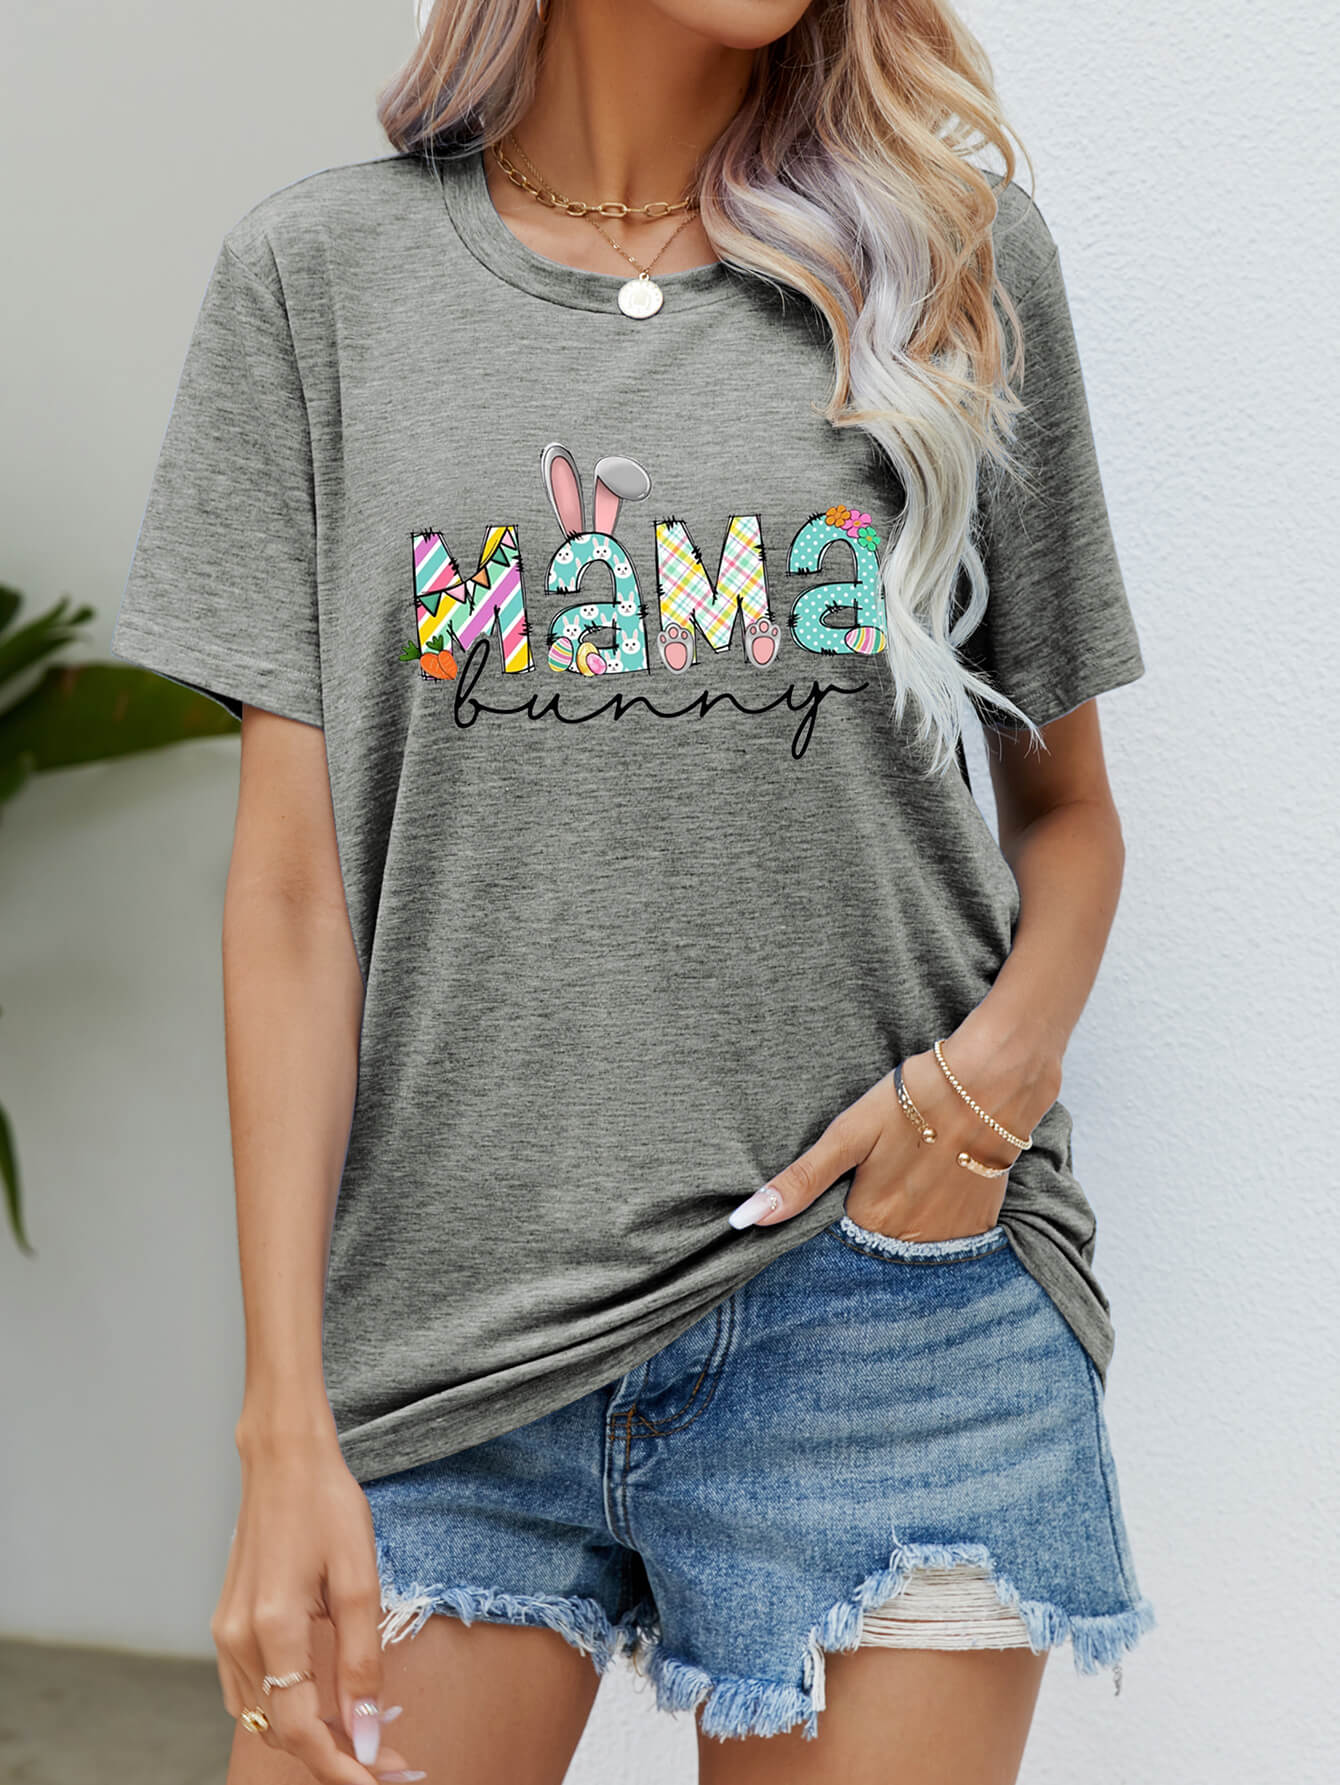 MAMA BUNNY Easter Graphic Tee (6 Colors)  Krazy Heart Designs Boutique Heather Gray S 